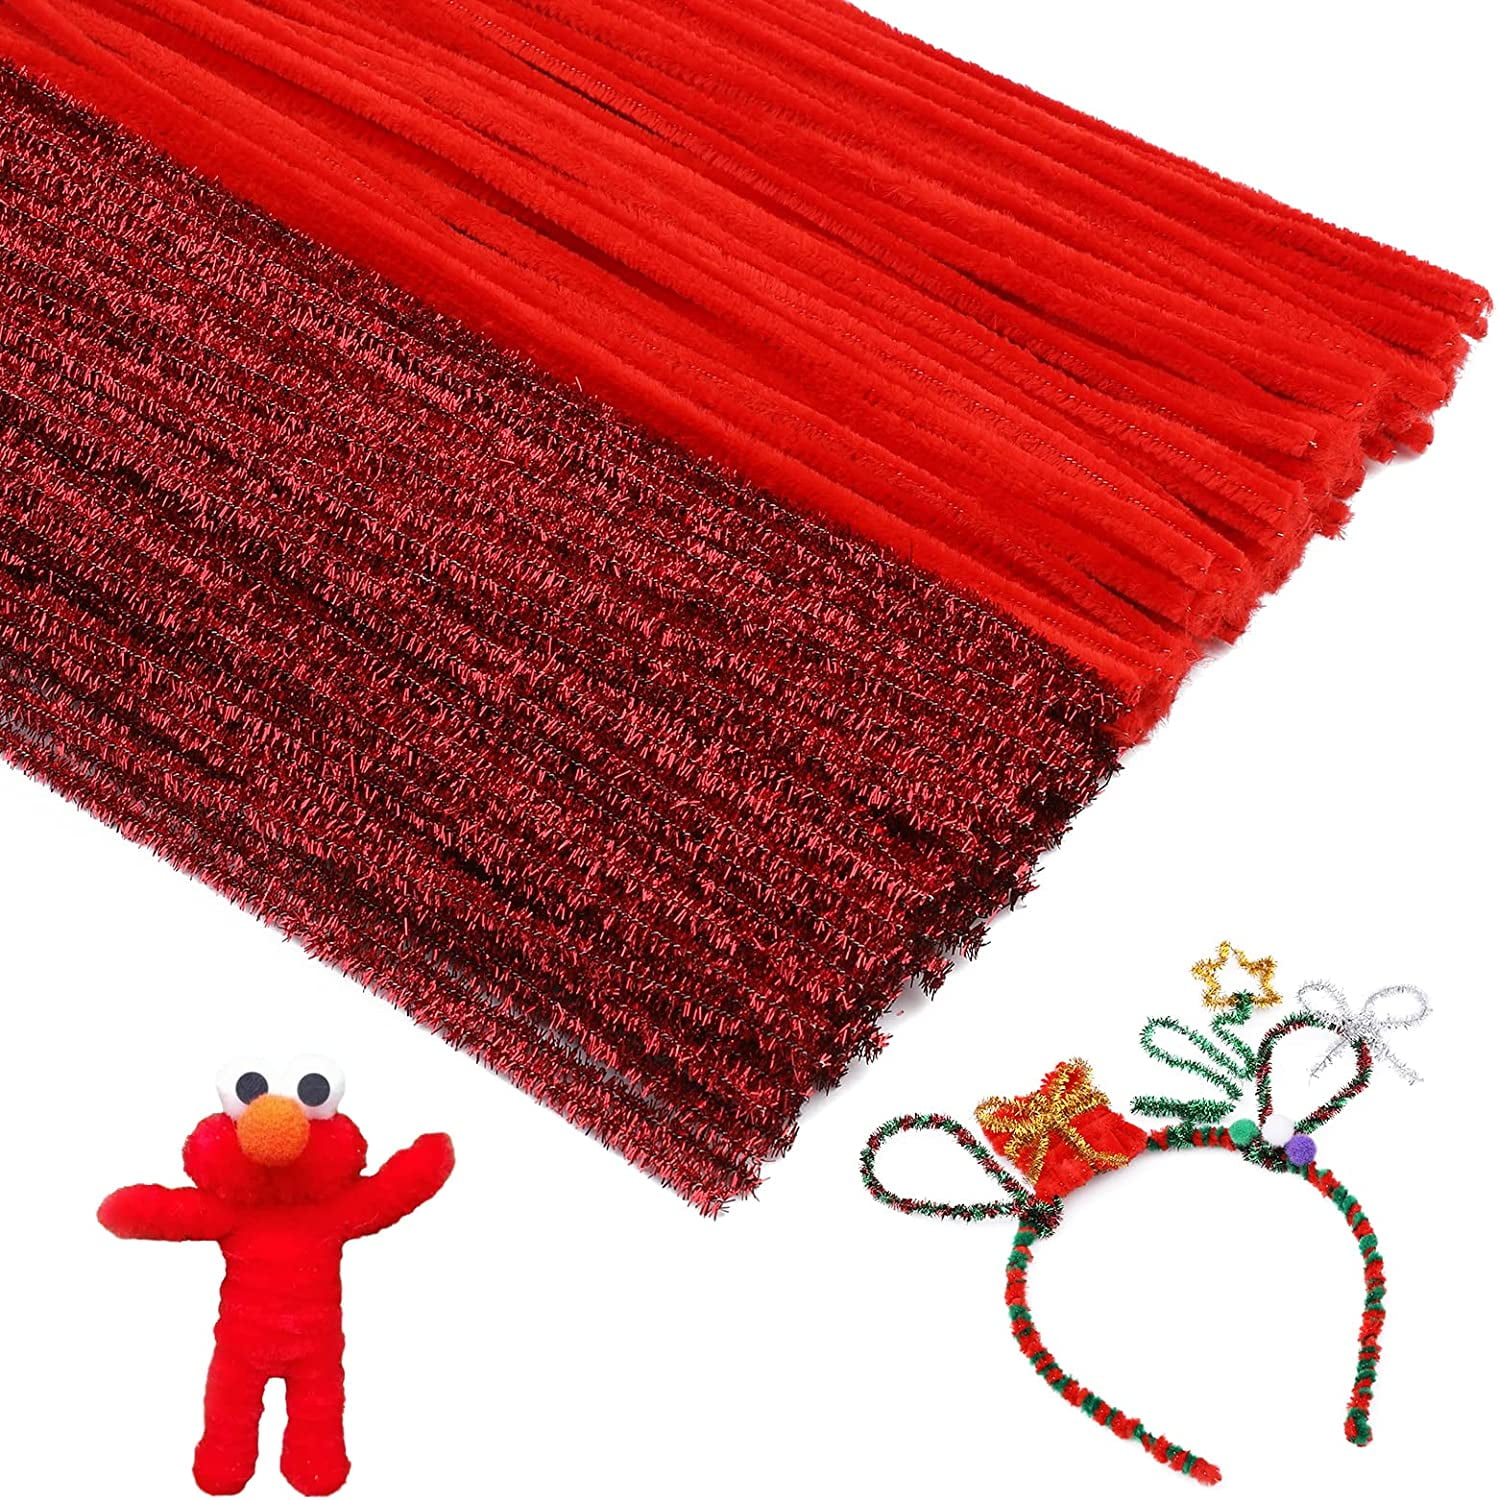 200 Pieces Christmas White Pipe Cleaners Chenille Stem Set,100